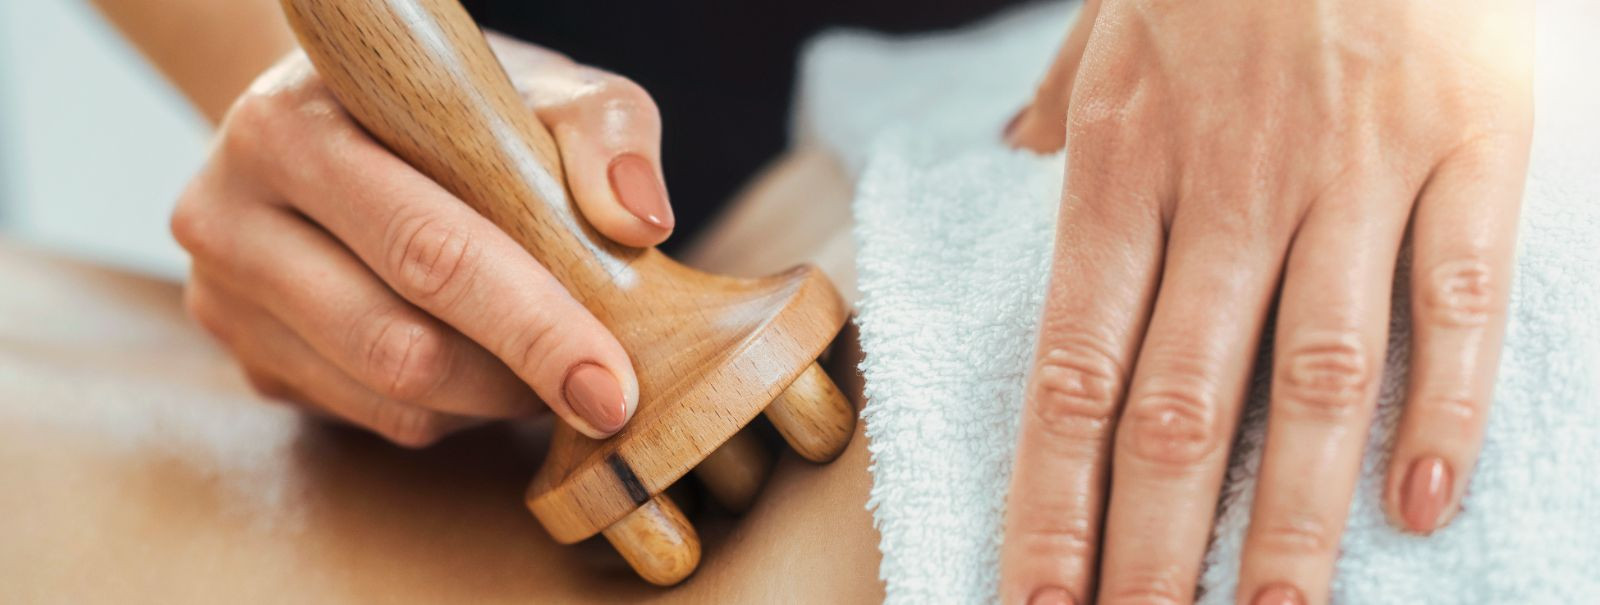 Mer Massage is a holistic therapy that combines the ancient wisdom of energy healing with the therapeutic touch of massage. It is designed to align and balance 